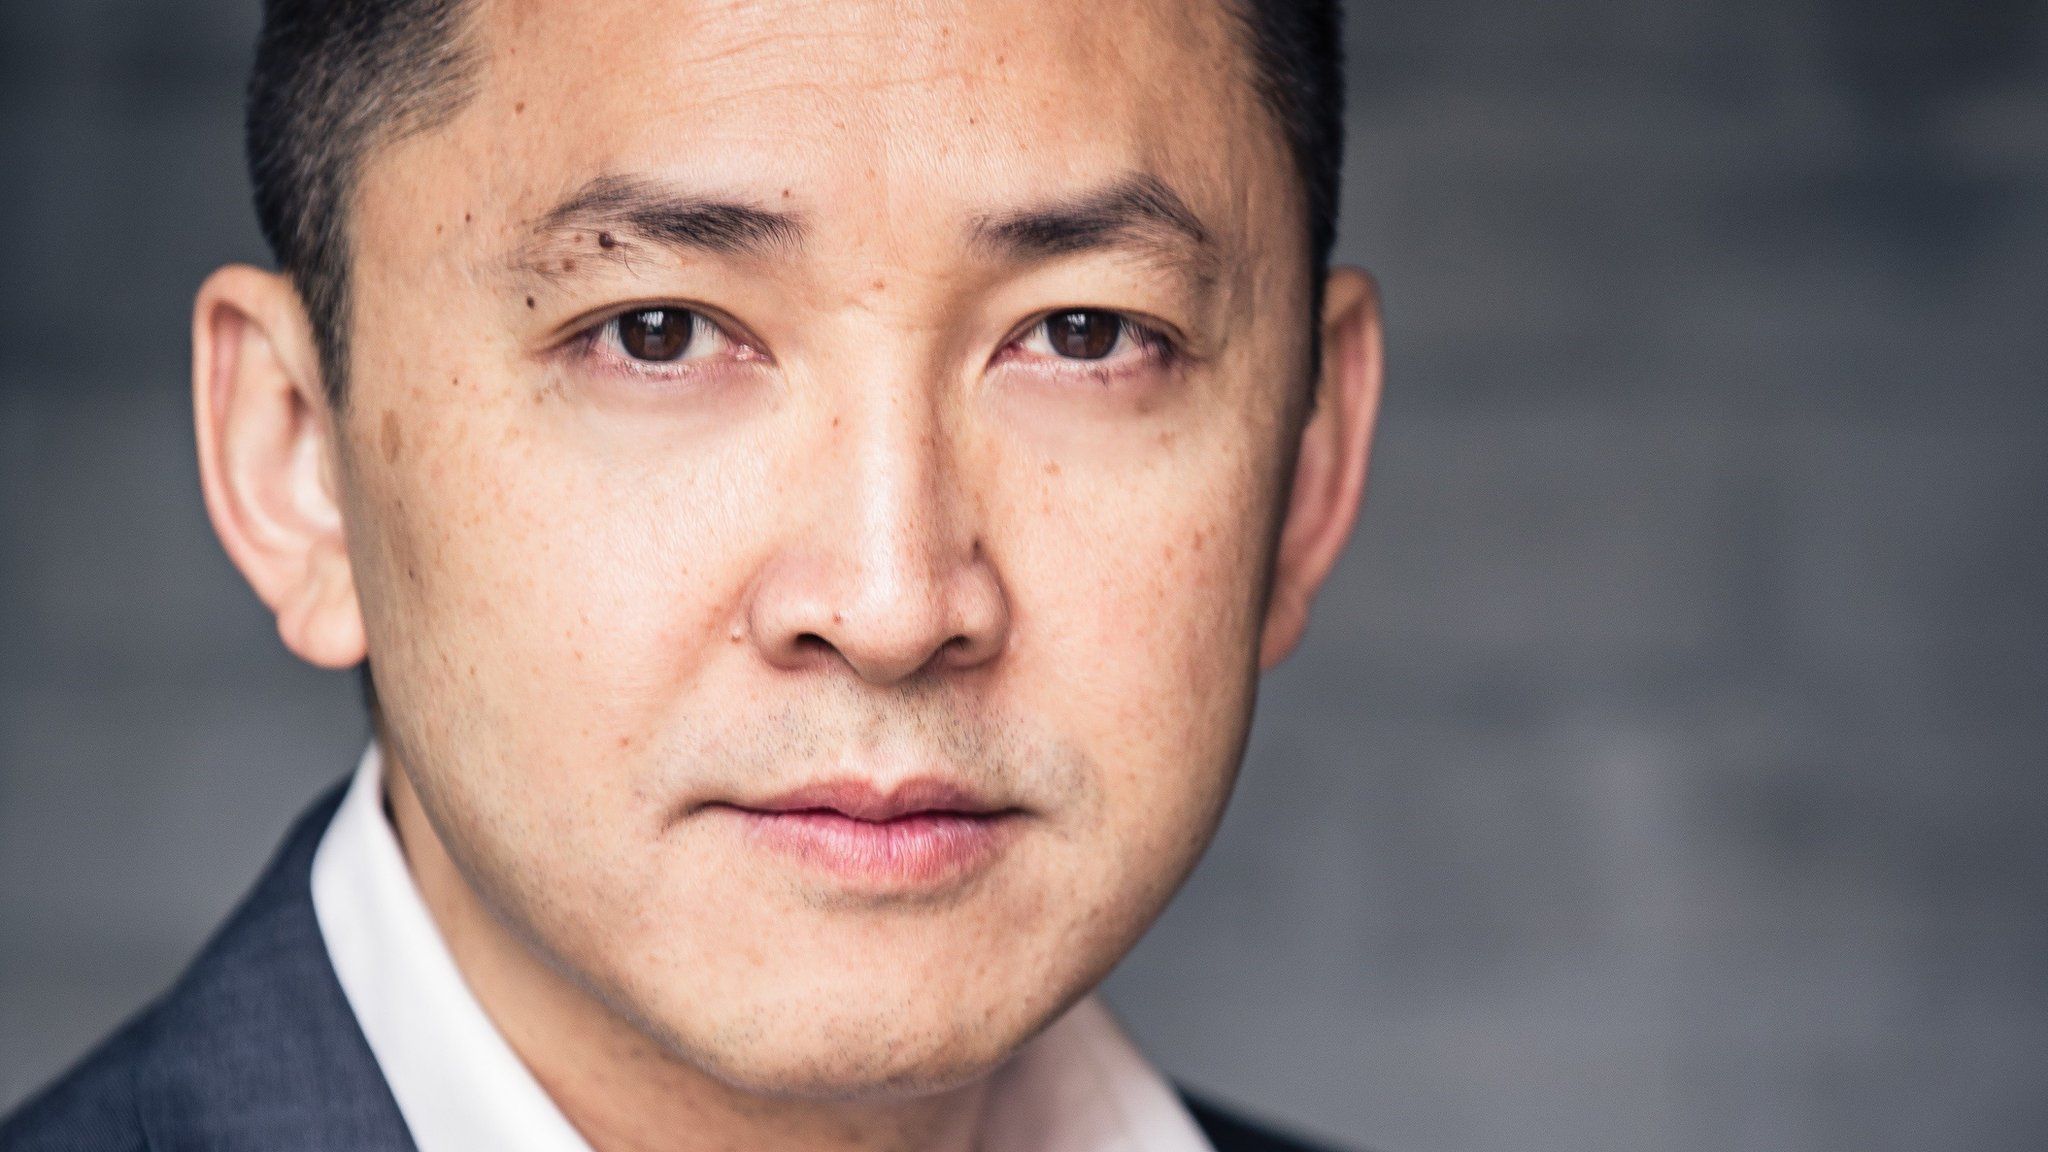 Image of Viet Thanh Nguyen